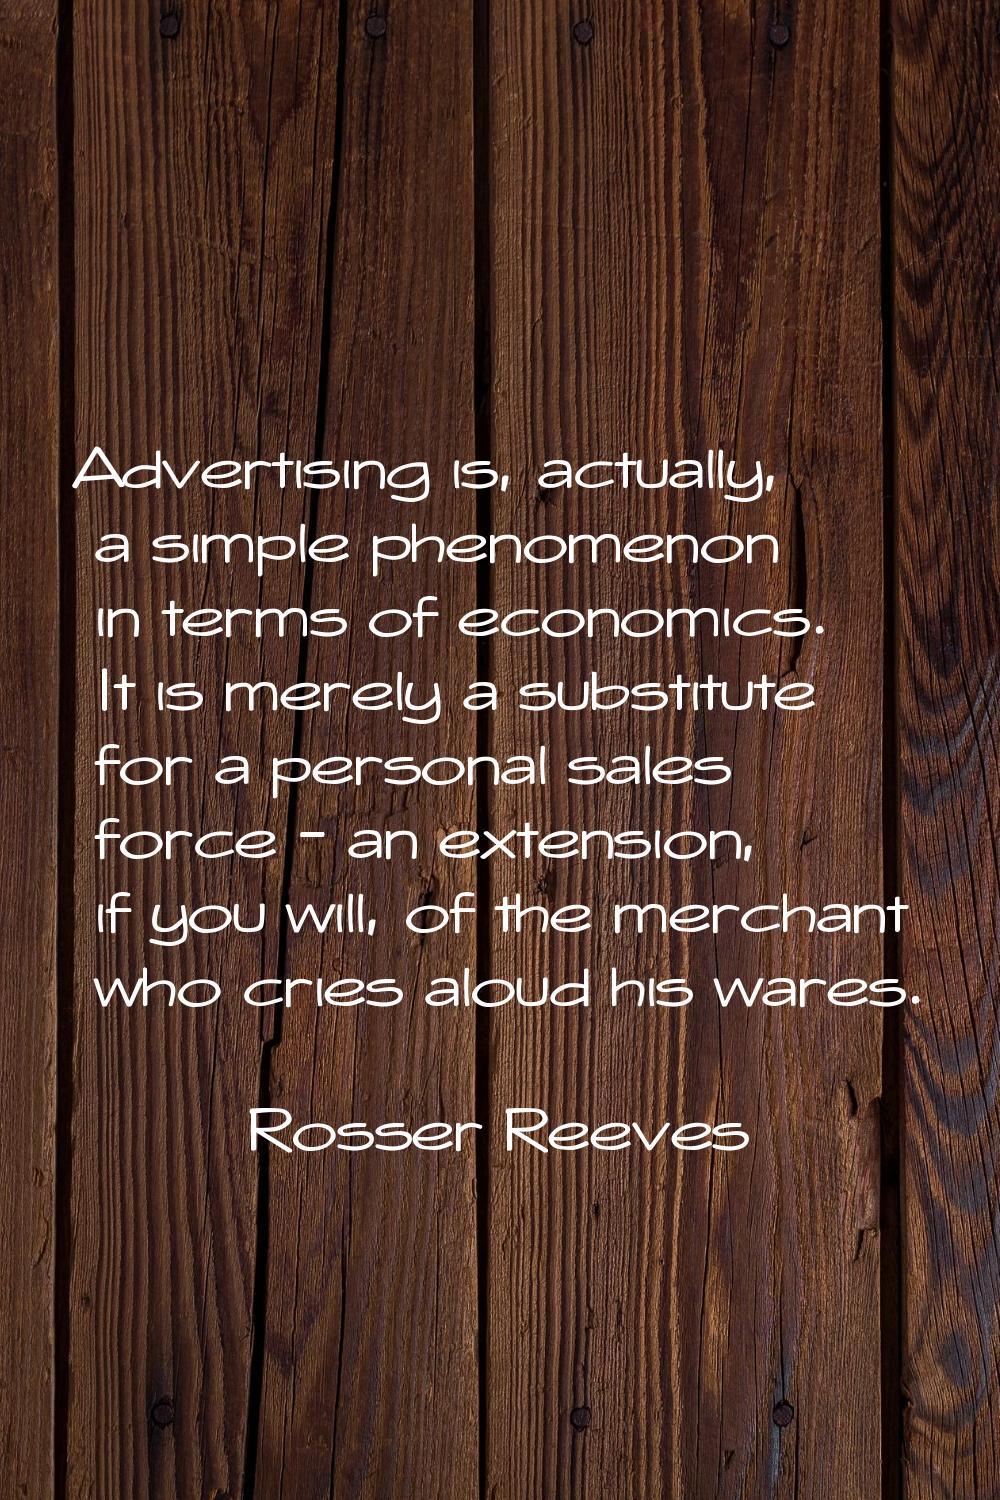 Advertising is, actually, a simple phenomenon in terms of economics. It is merely a substitute for 